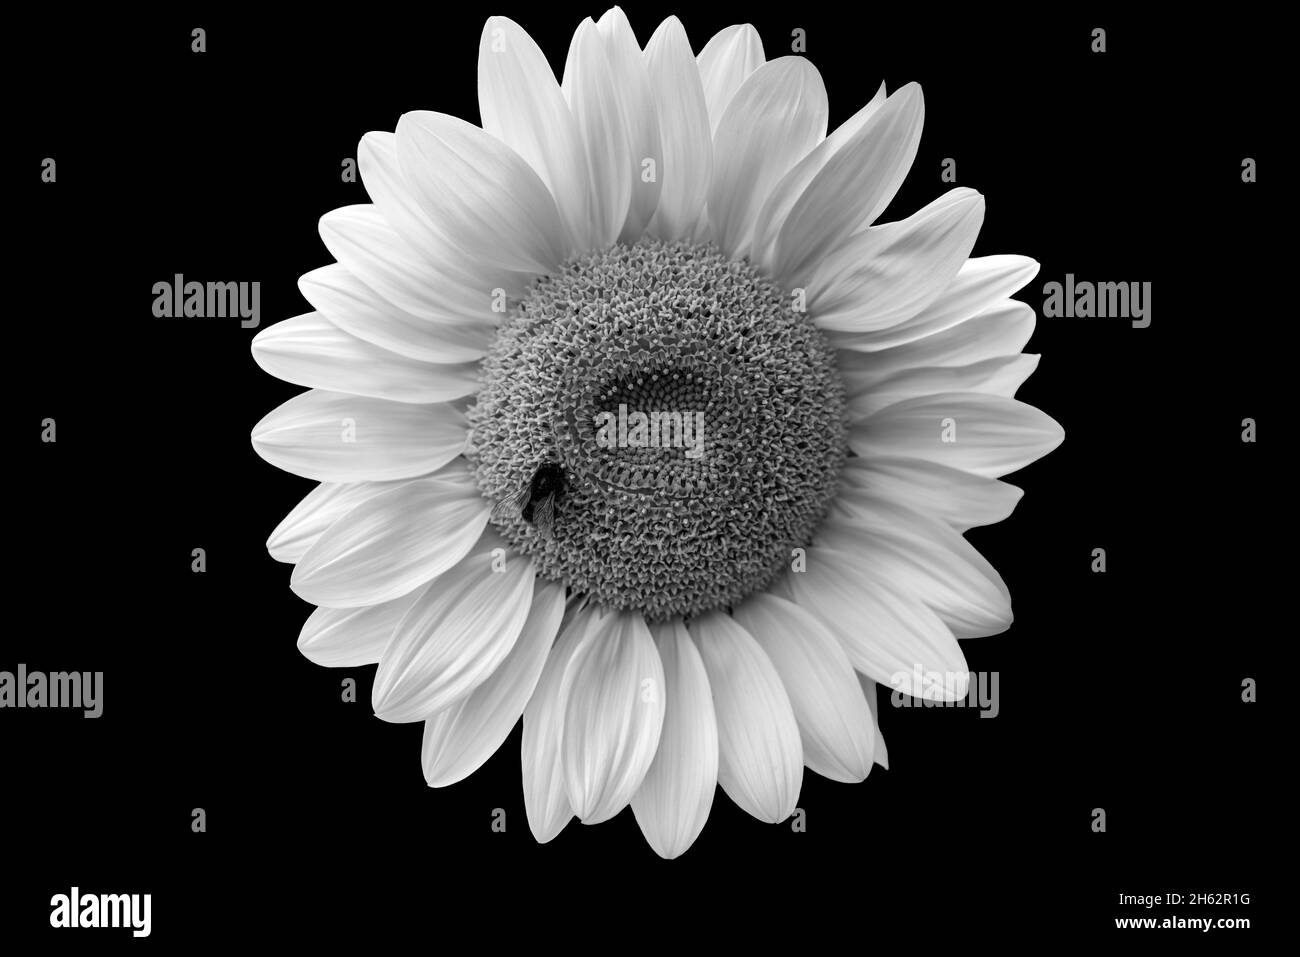 bloomed from a sunflower in black and white,bumblebee sits on sunflower Stock Photo